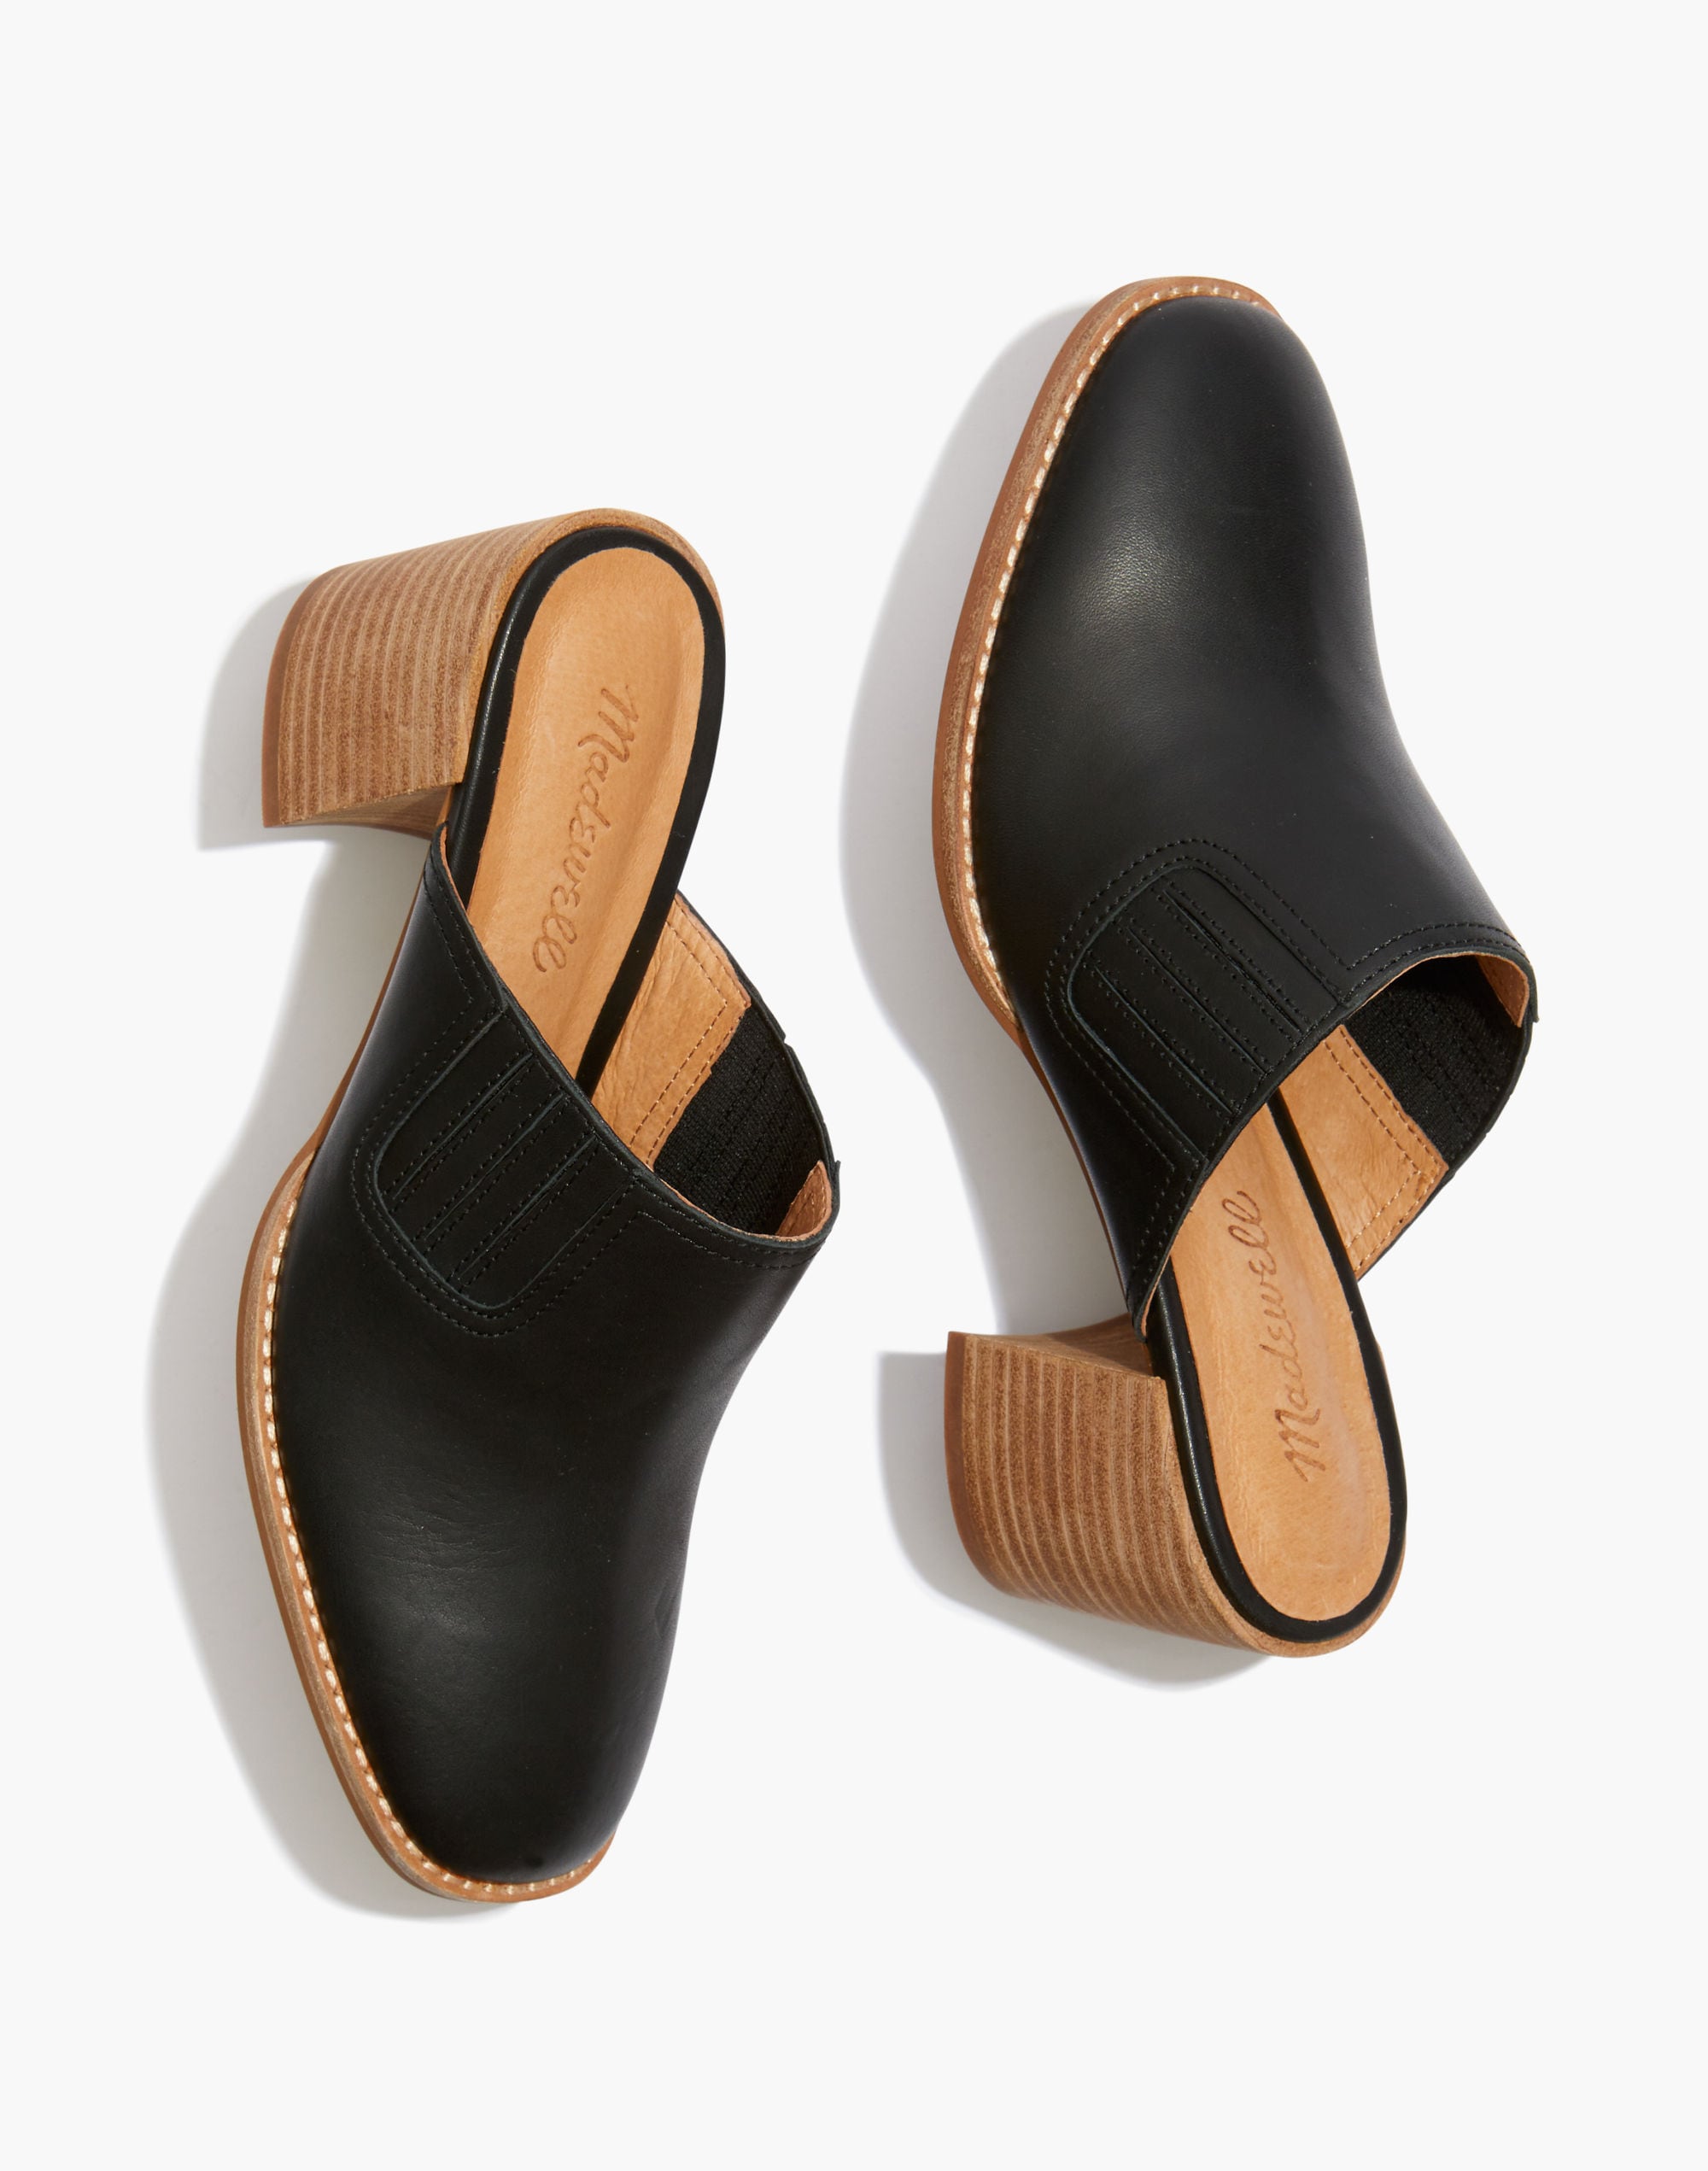 The Carey Mule in Leather